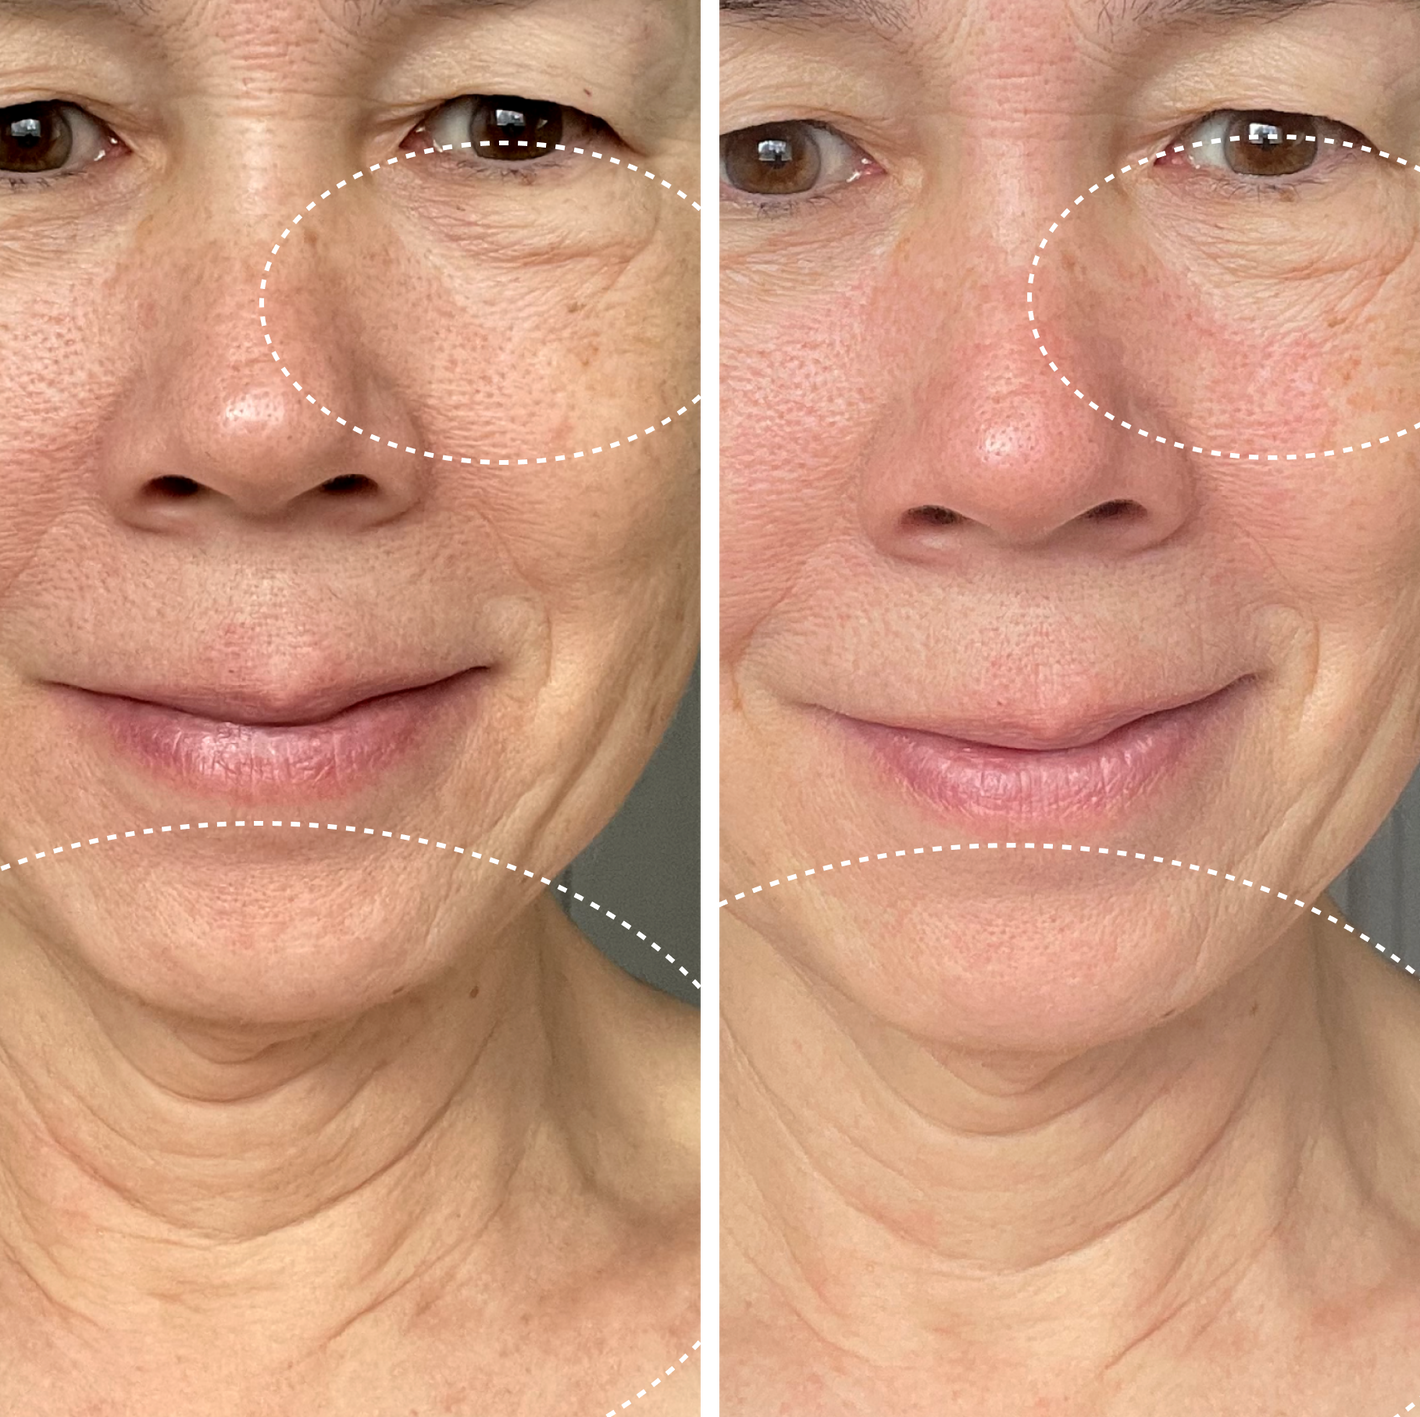 Two side by side images of a female-presenting person showing skin before and after 2 weeks use of Droplette Radiant Detox